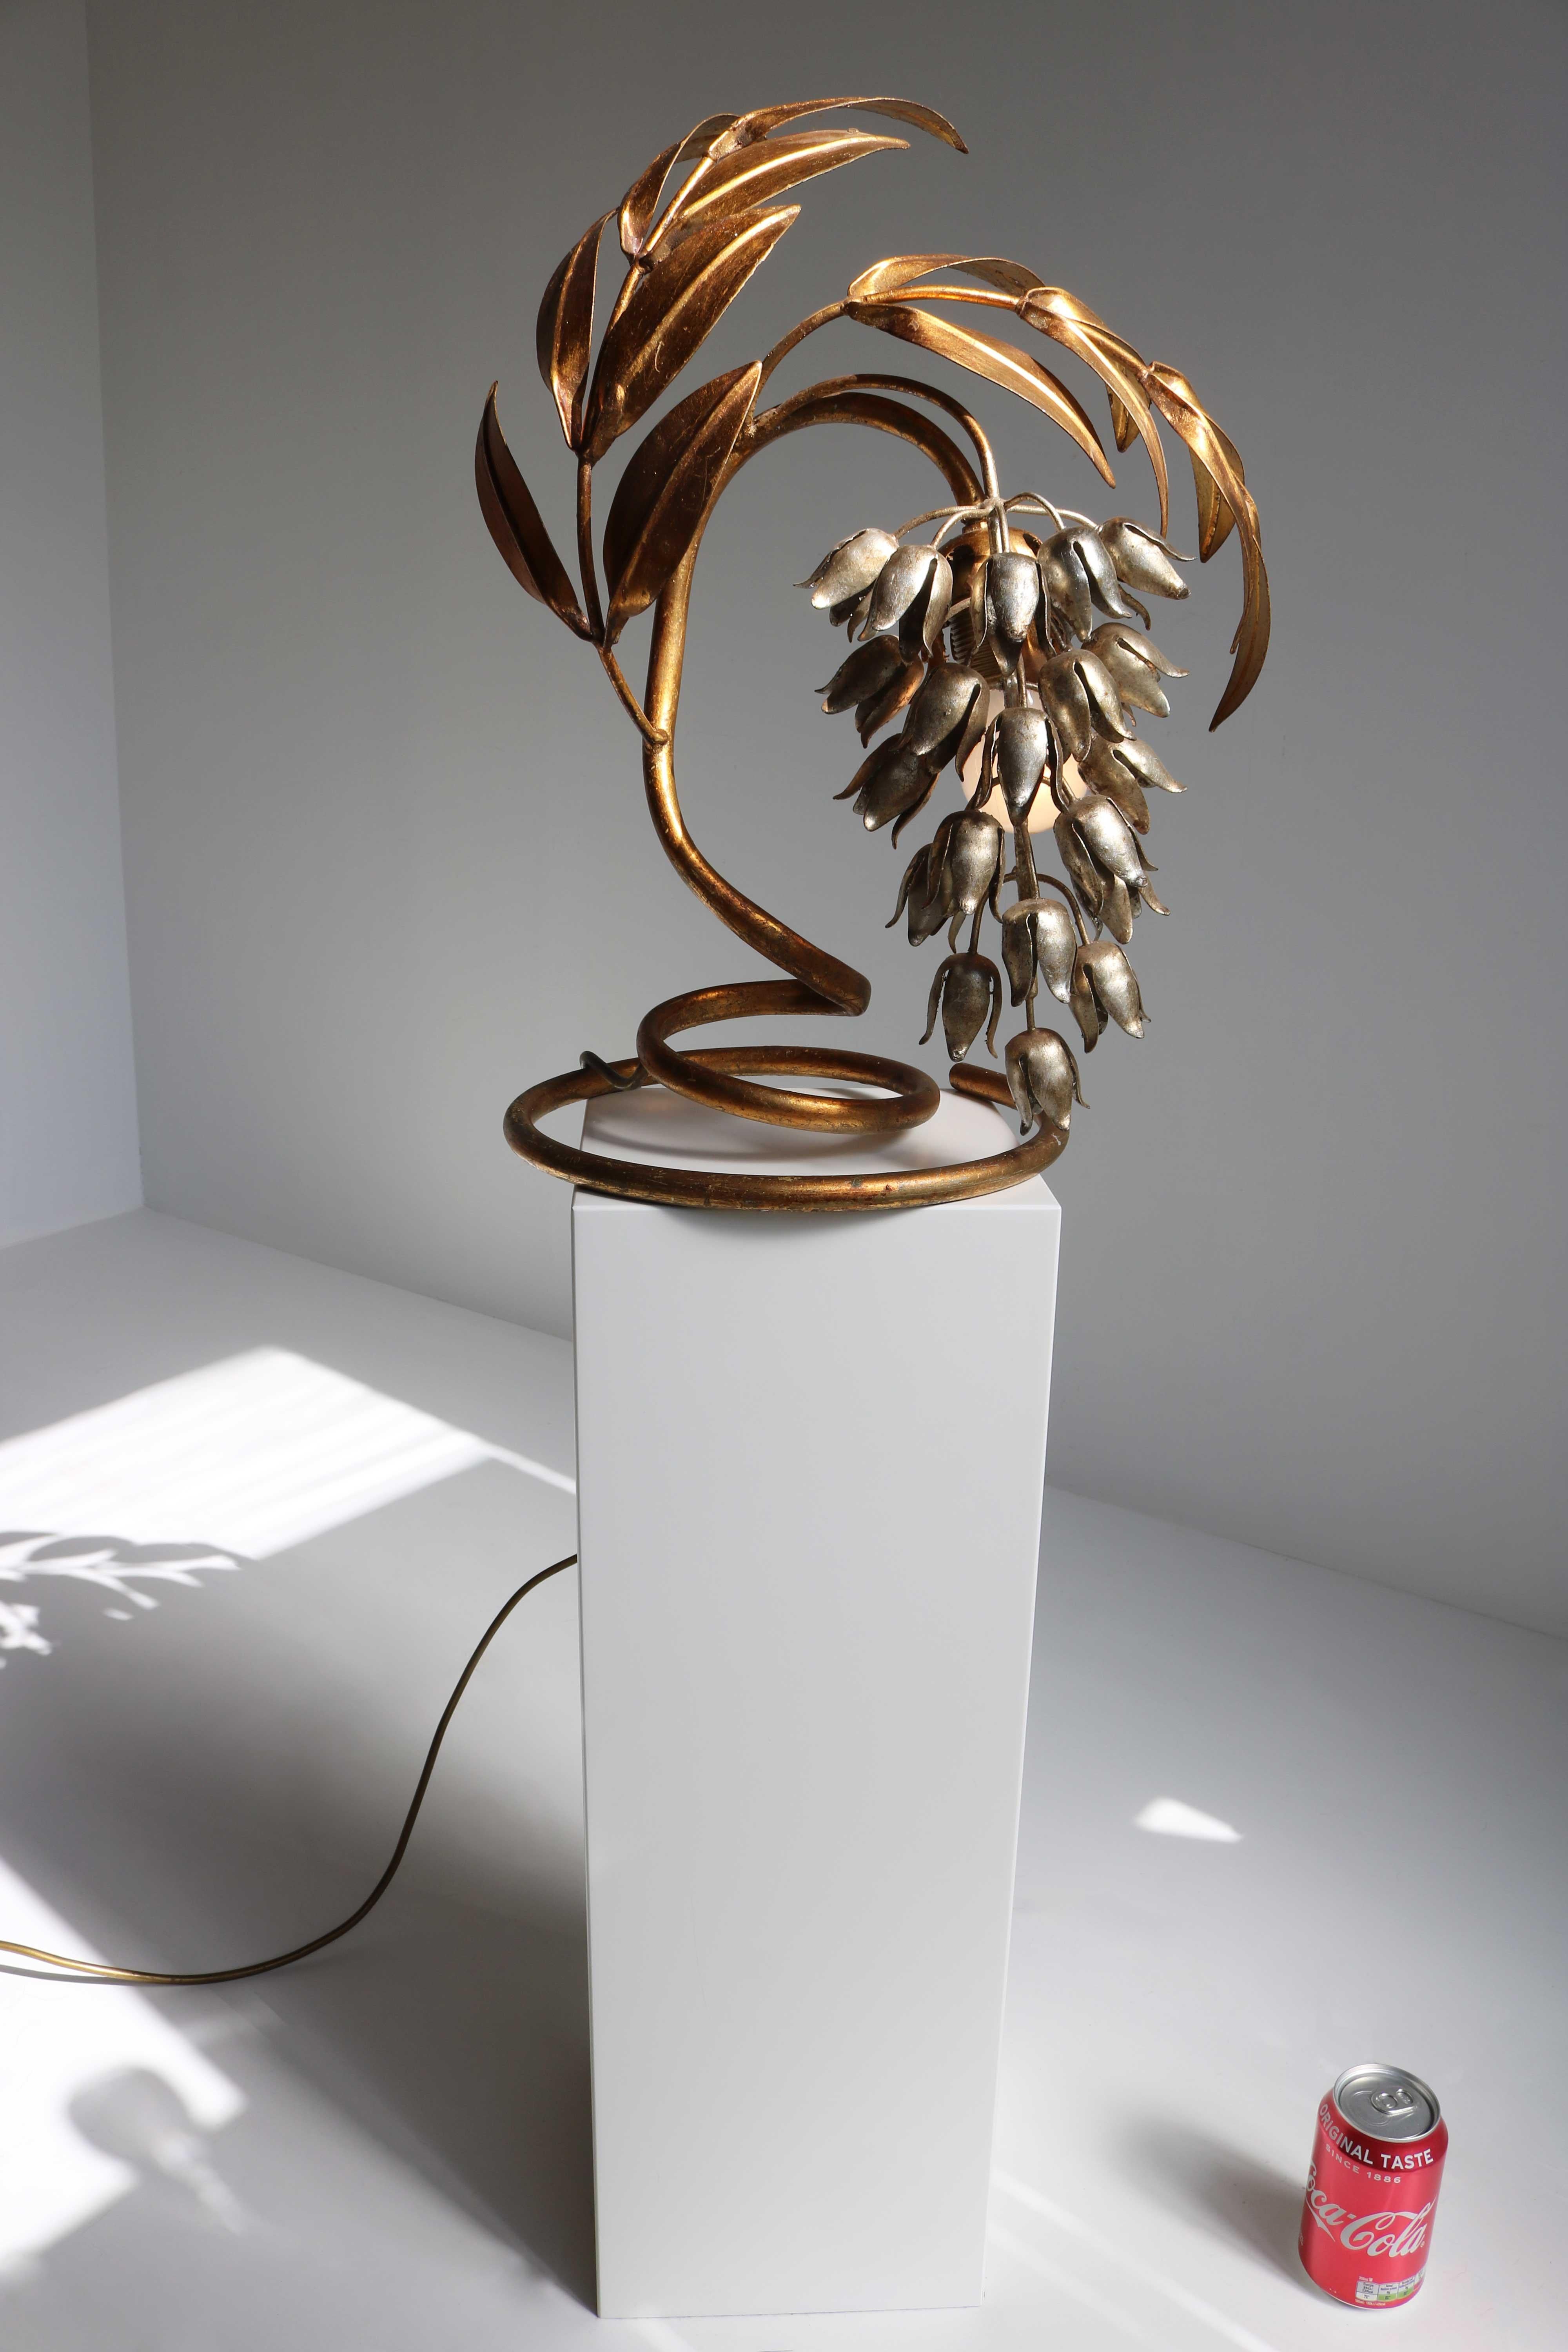 Wisteria Table Lamp, Regency Gilt Table Light by Hans Kögl, Germany, 1970s For Sale 8